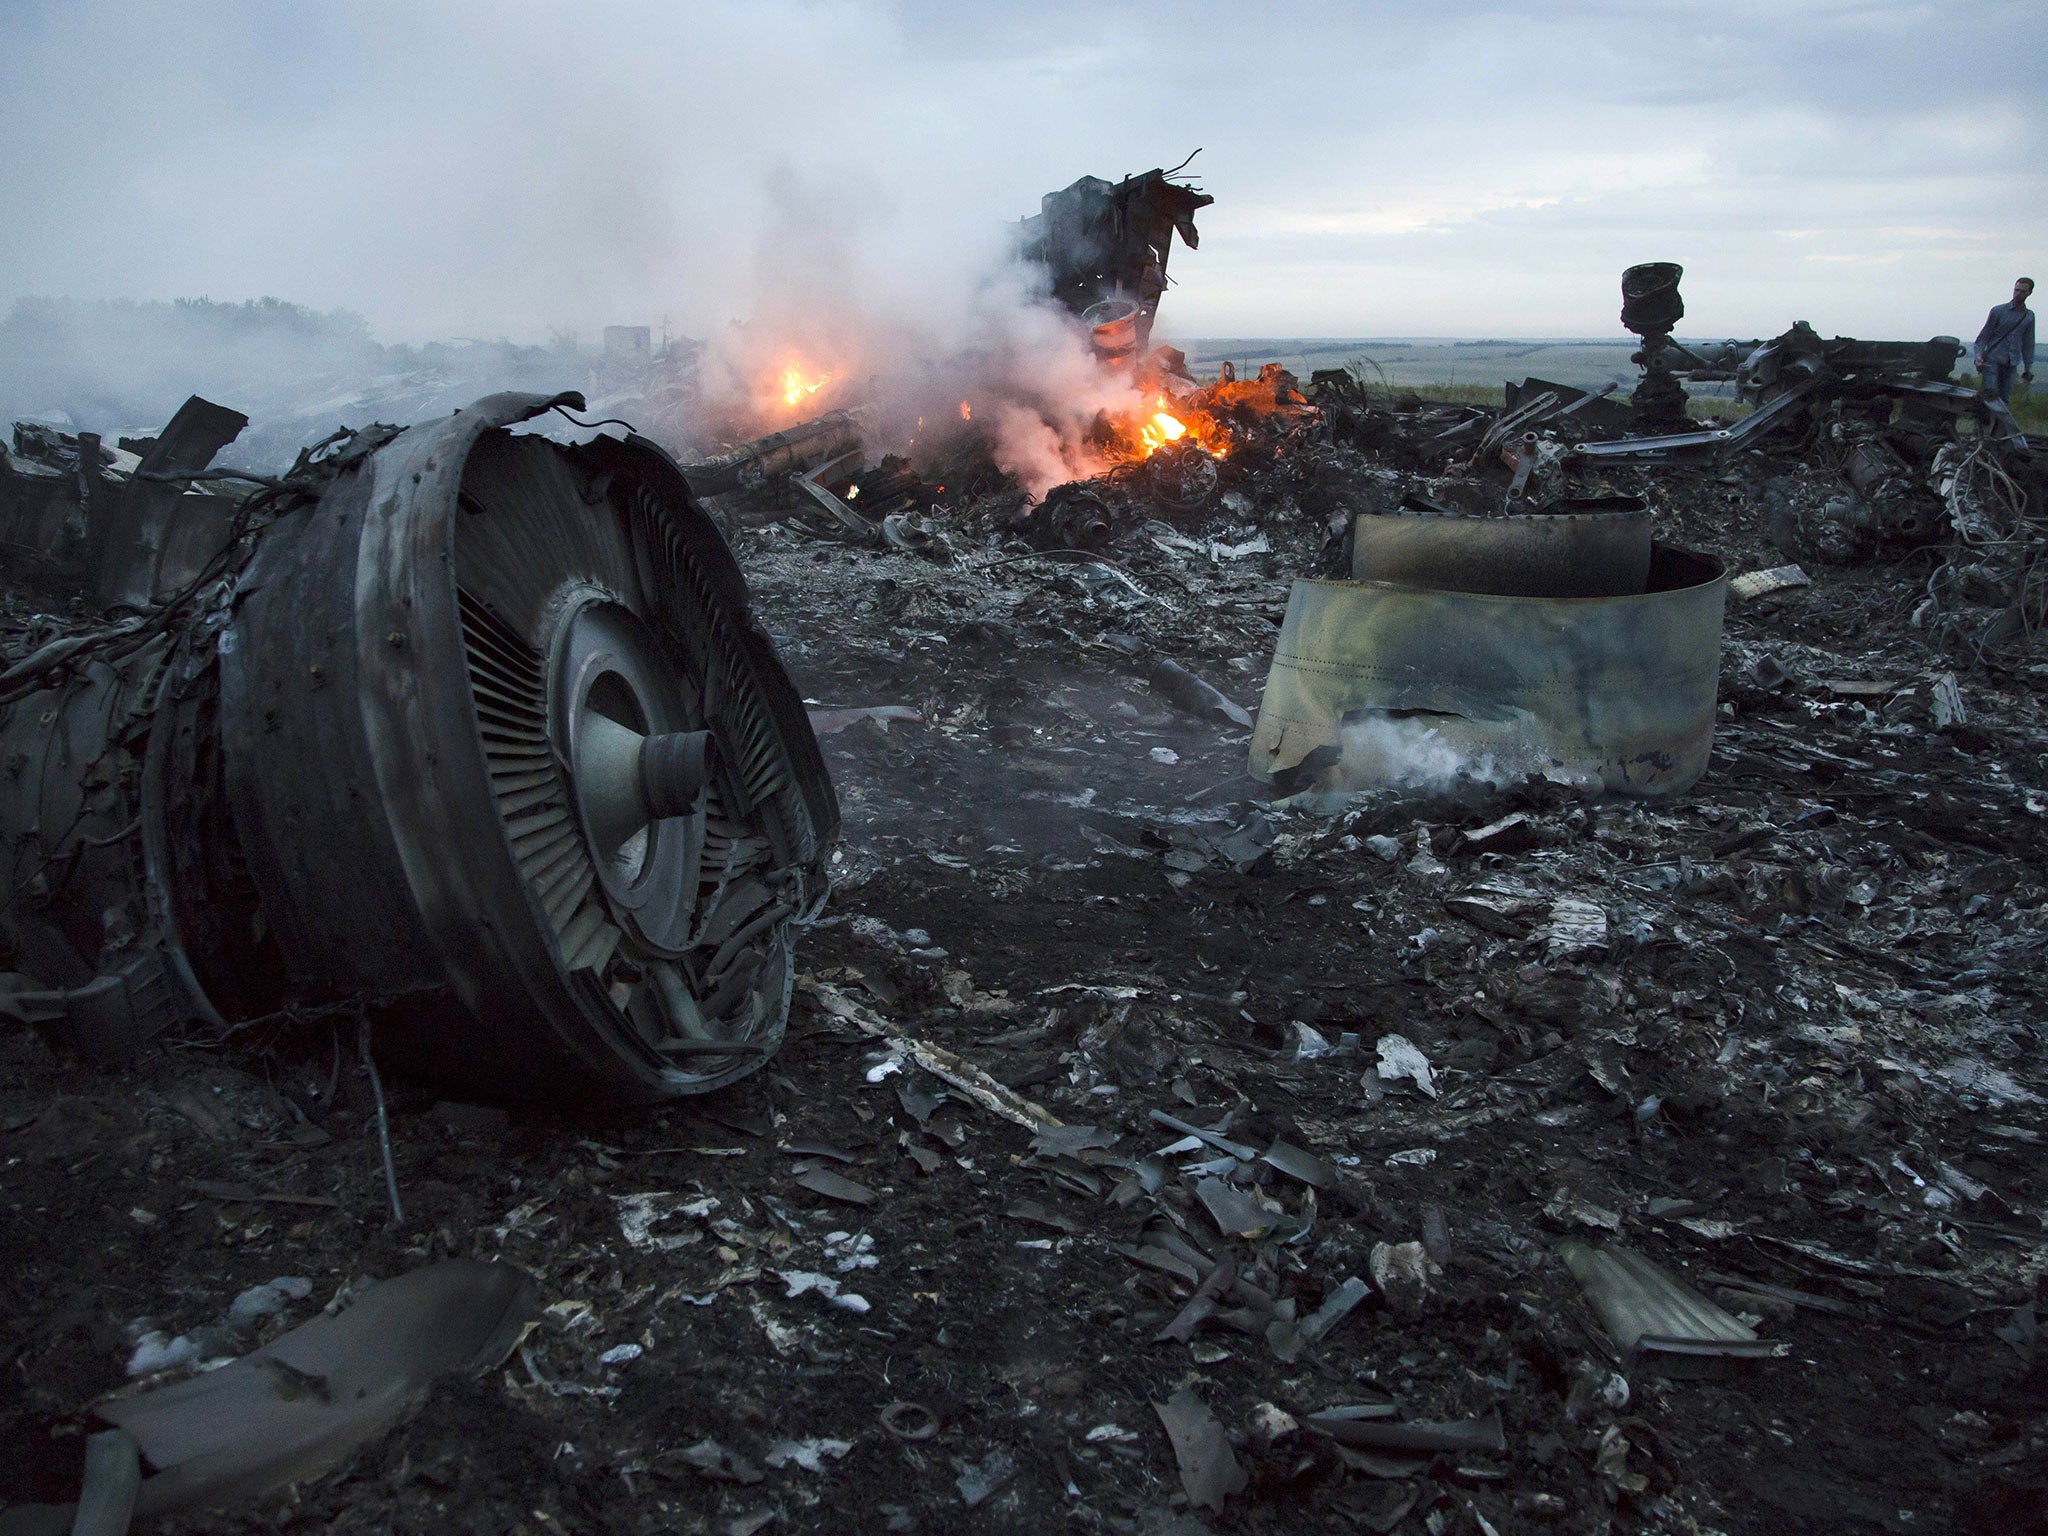 The crash site of the MH17 flight between the two villages of Rozsypne and Hrabove